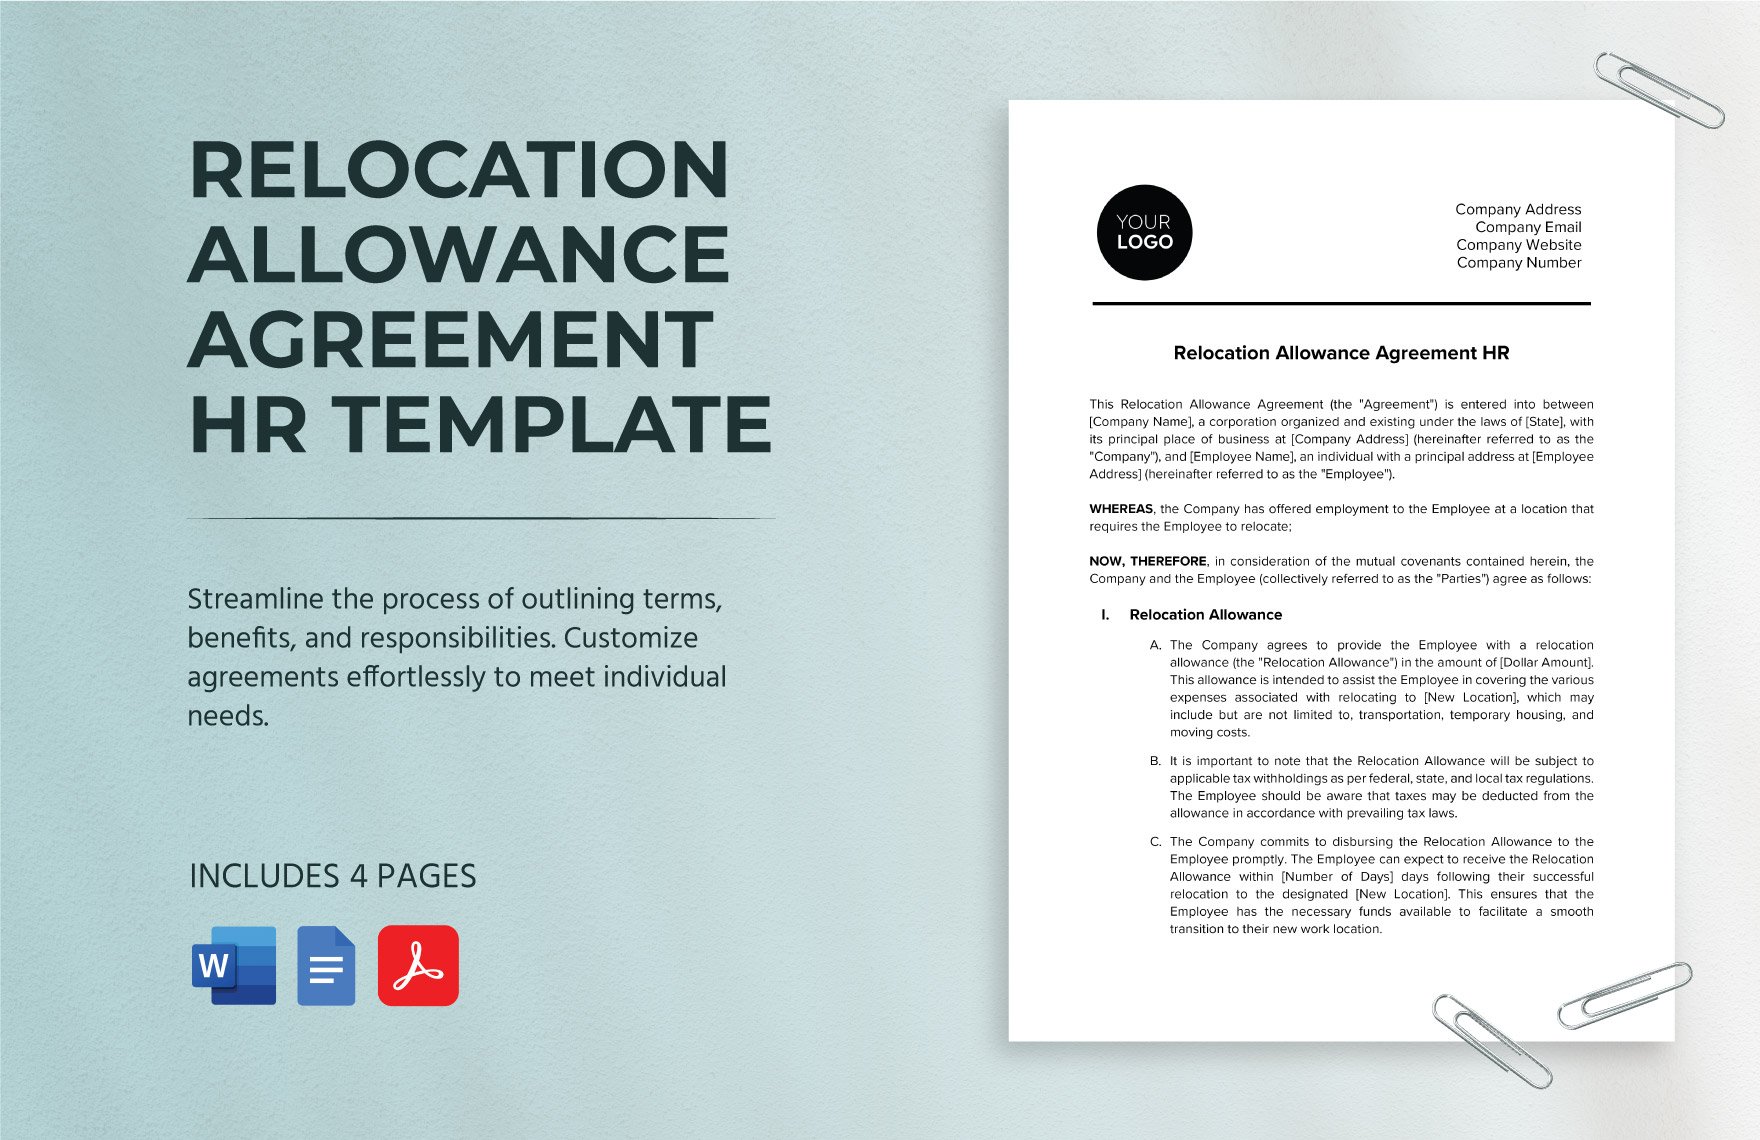 Relocation Allowance Agreement HR Template in Word, Google Docs, PDF